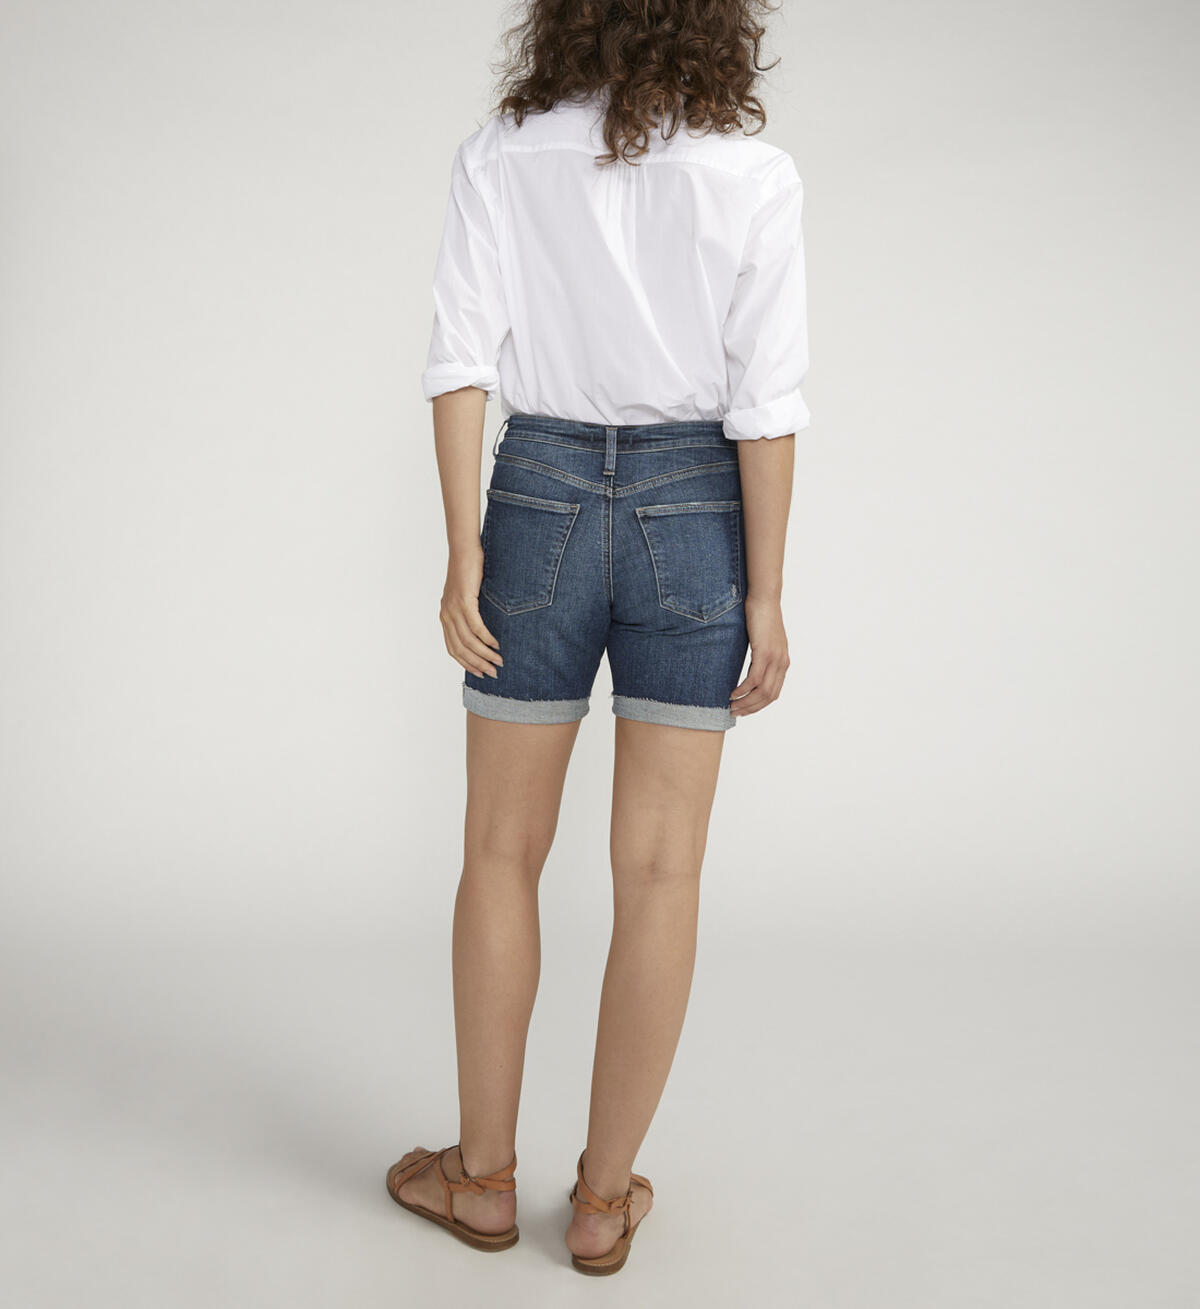 The name says it all—this on-trend women’s short is a Sure Thing. It’s designed with an everyday not-too-high high rise and a slim fit that’s perfect for a variety of body types. Plus, the stretch denim forms and shapes to flatter every angle. Finished with a length that lands just above the knee.